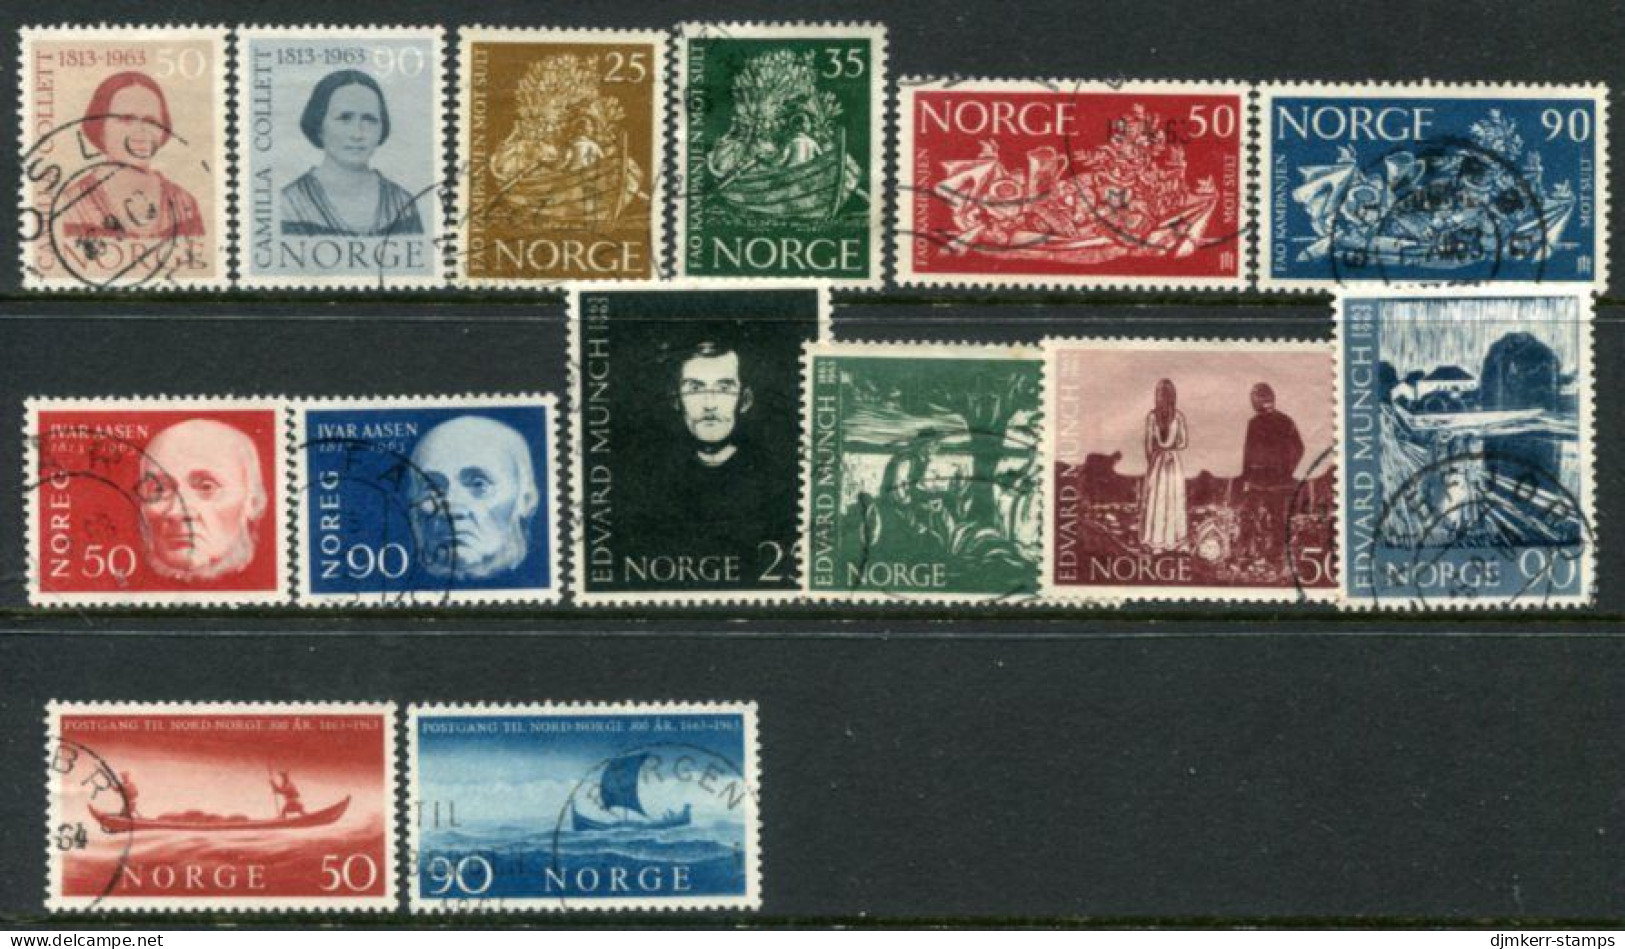 NORWAY 1963 Five Issues Used. - Gebraucht